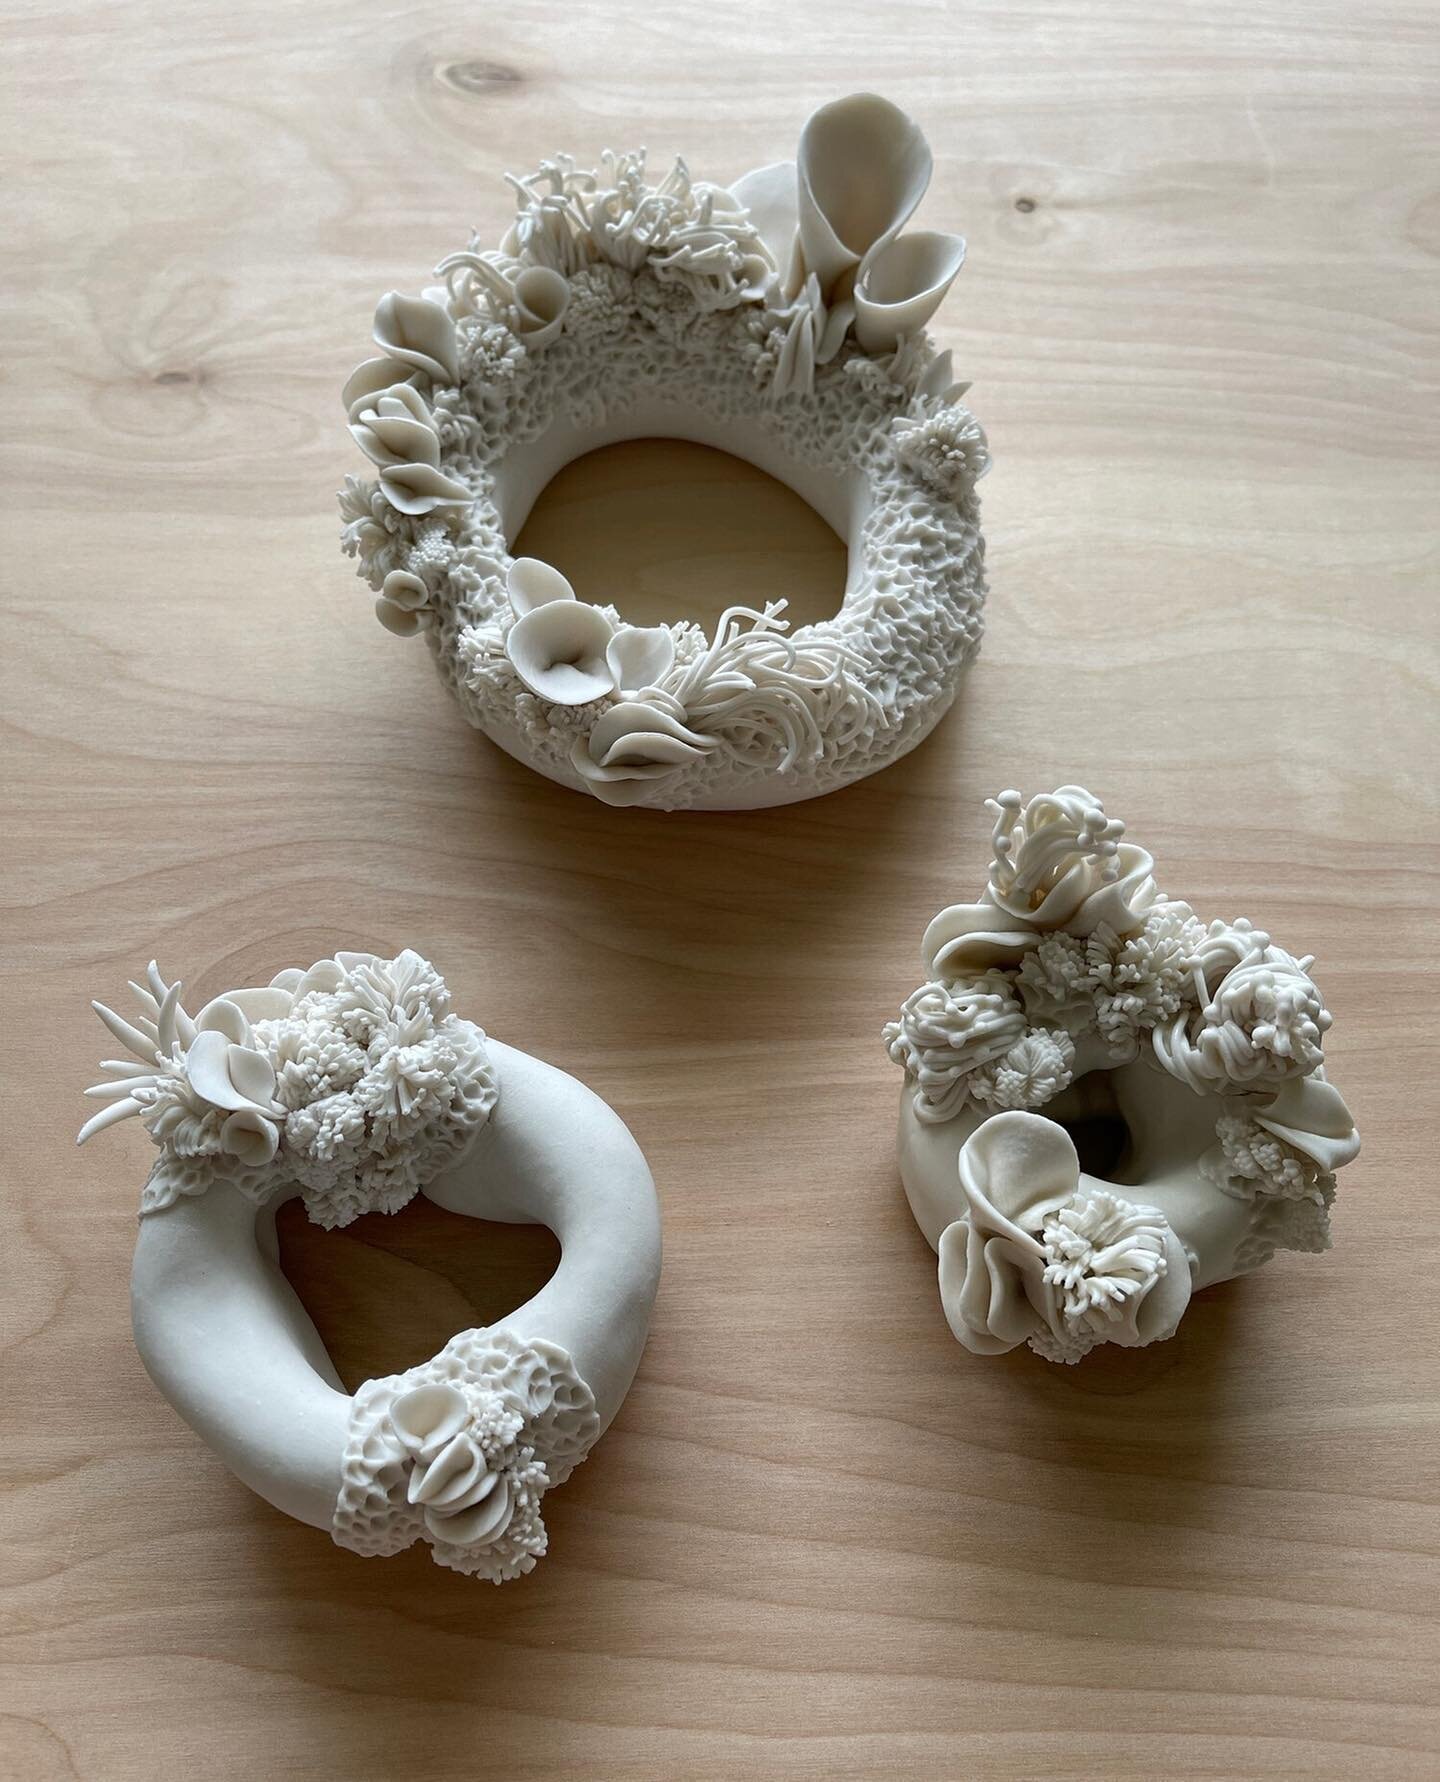 It goes to show: so excited to share that three of my porcelain sculptures have been selected to be part of Botanical Abundance, the 17th annual juried ceramics exhibition at McGroarty Arts Center (Tijunga, CA). The work is all spectacular and made b